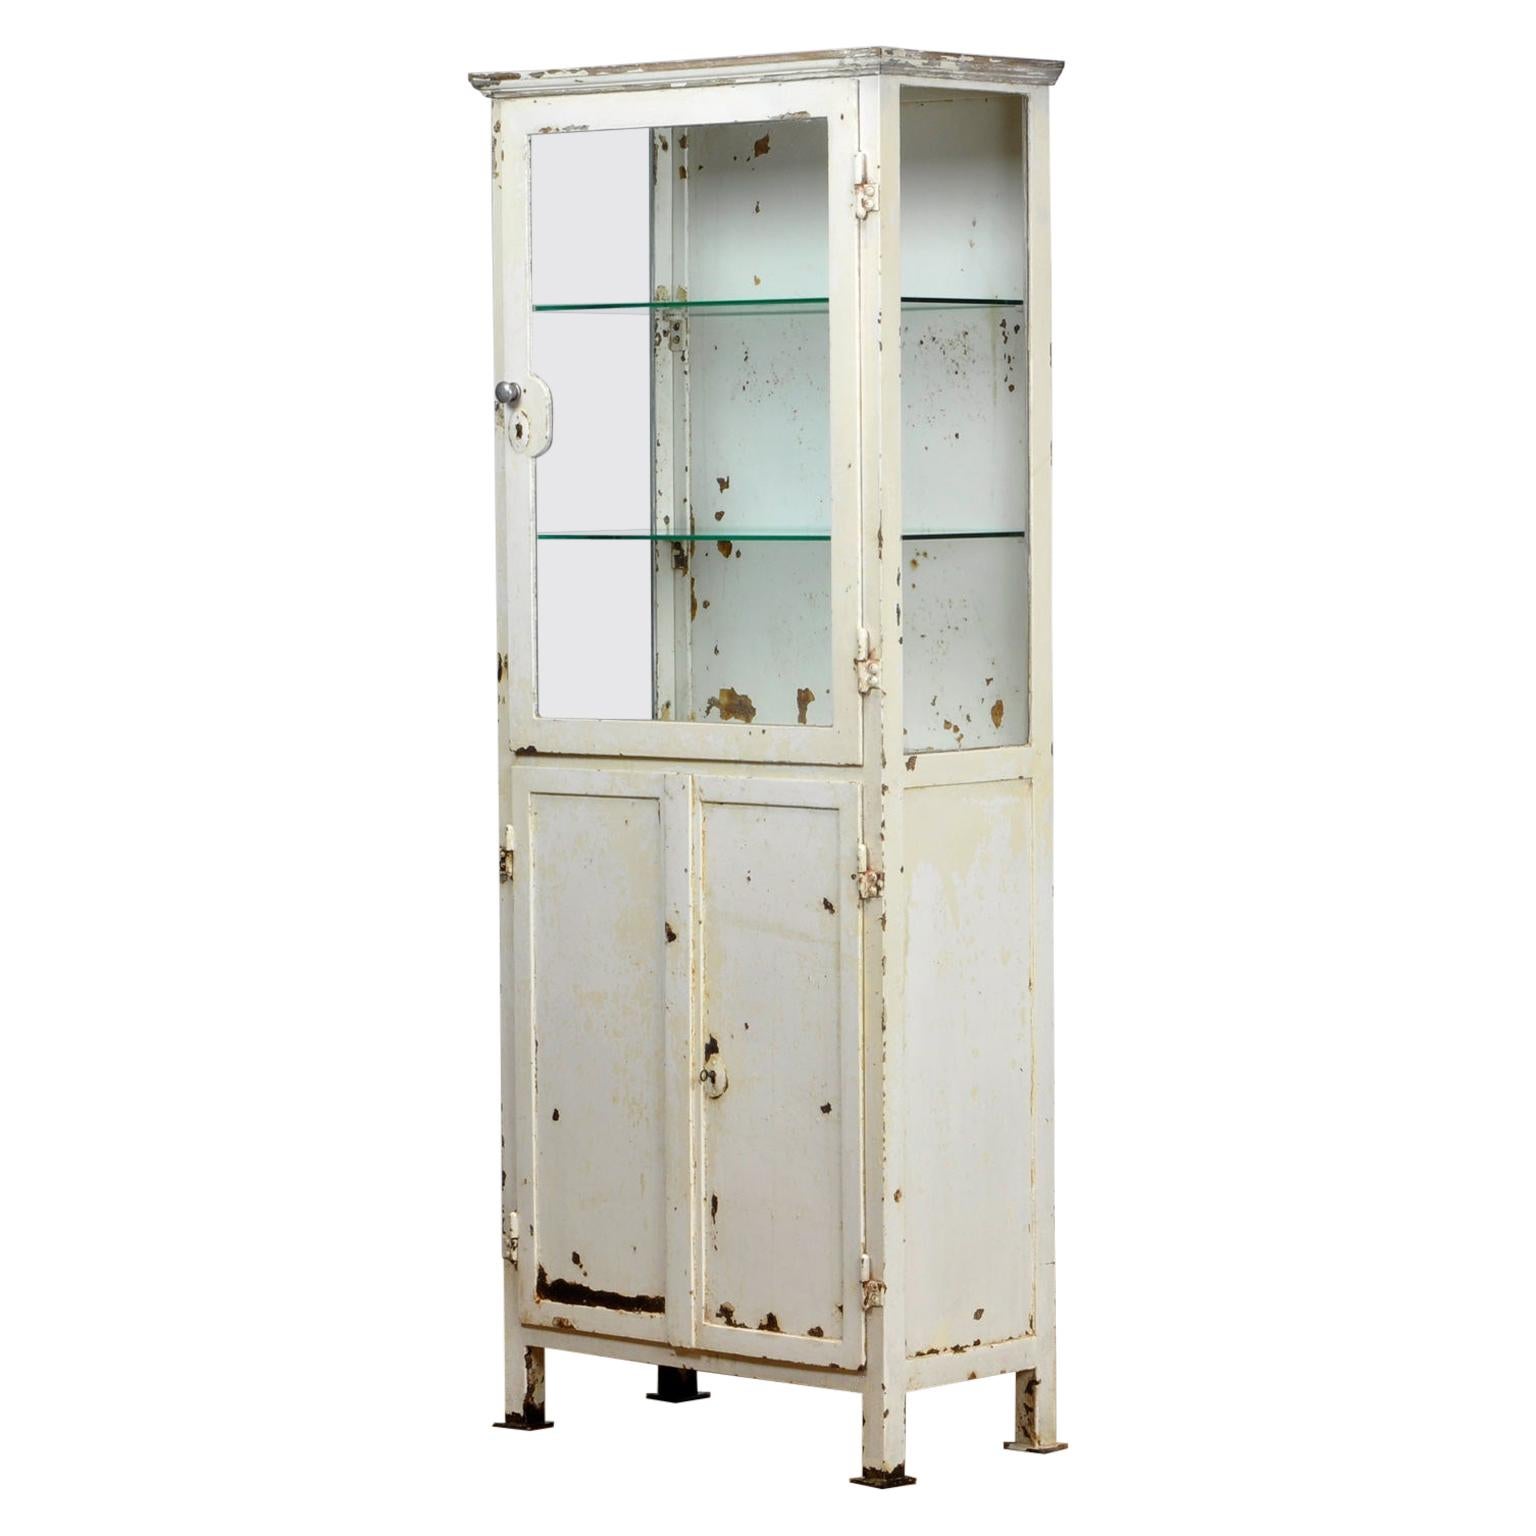 Vintage Glass and Iron Medical Cabinet, 1920s